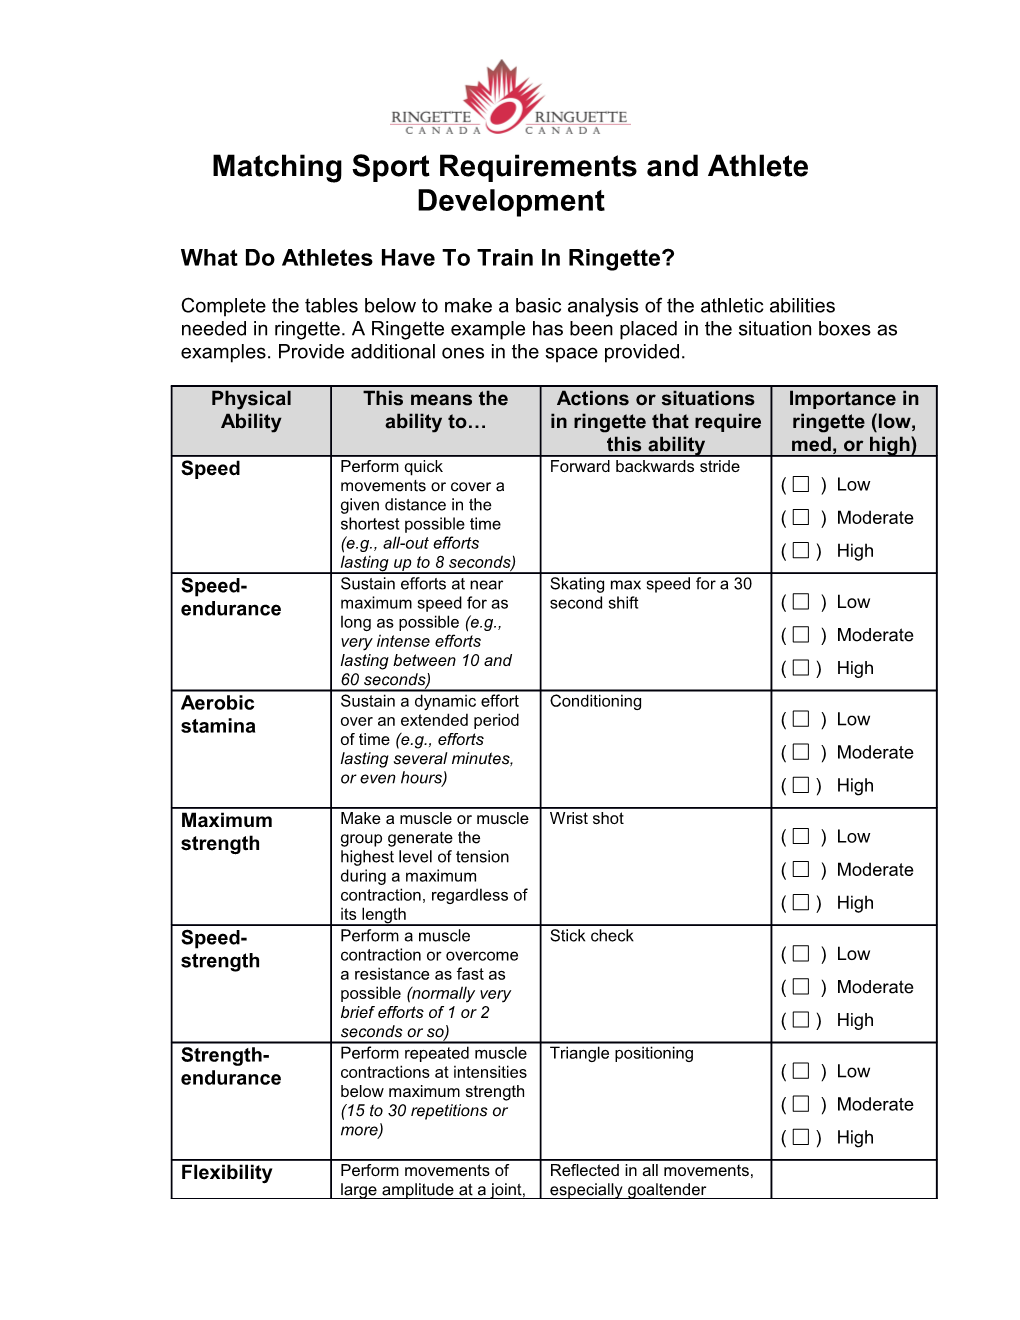 Matching Sport Requirements and Athlete Development